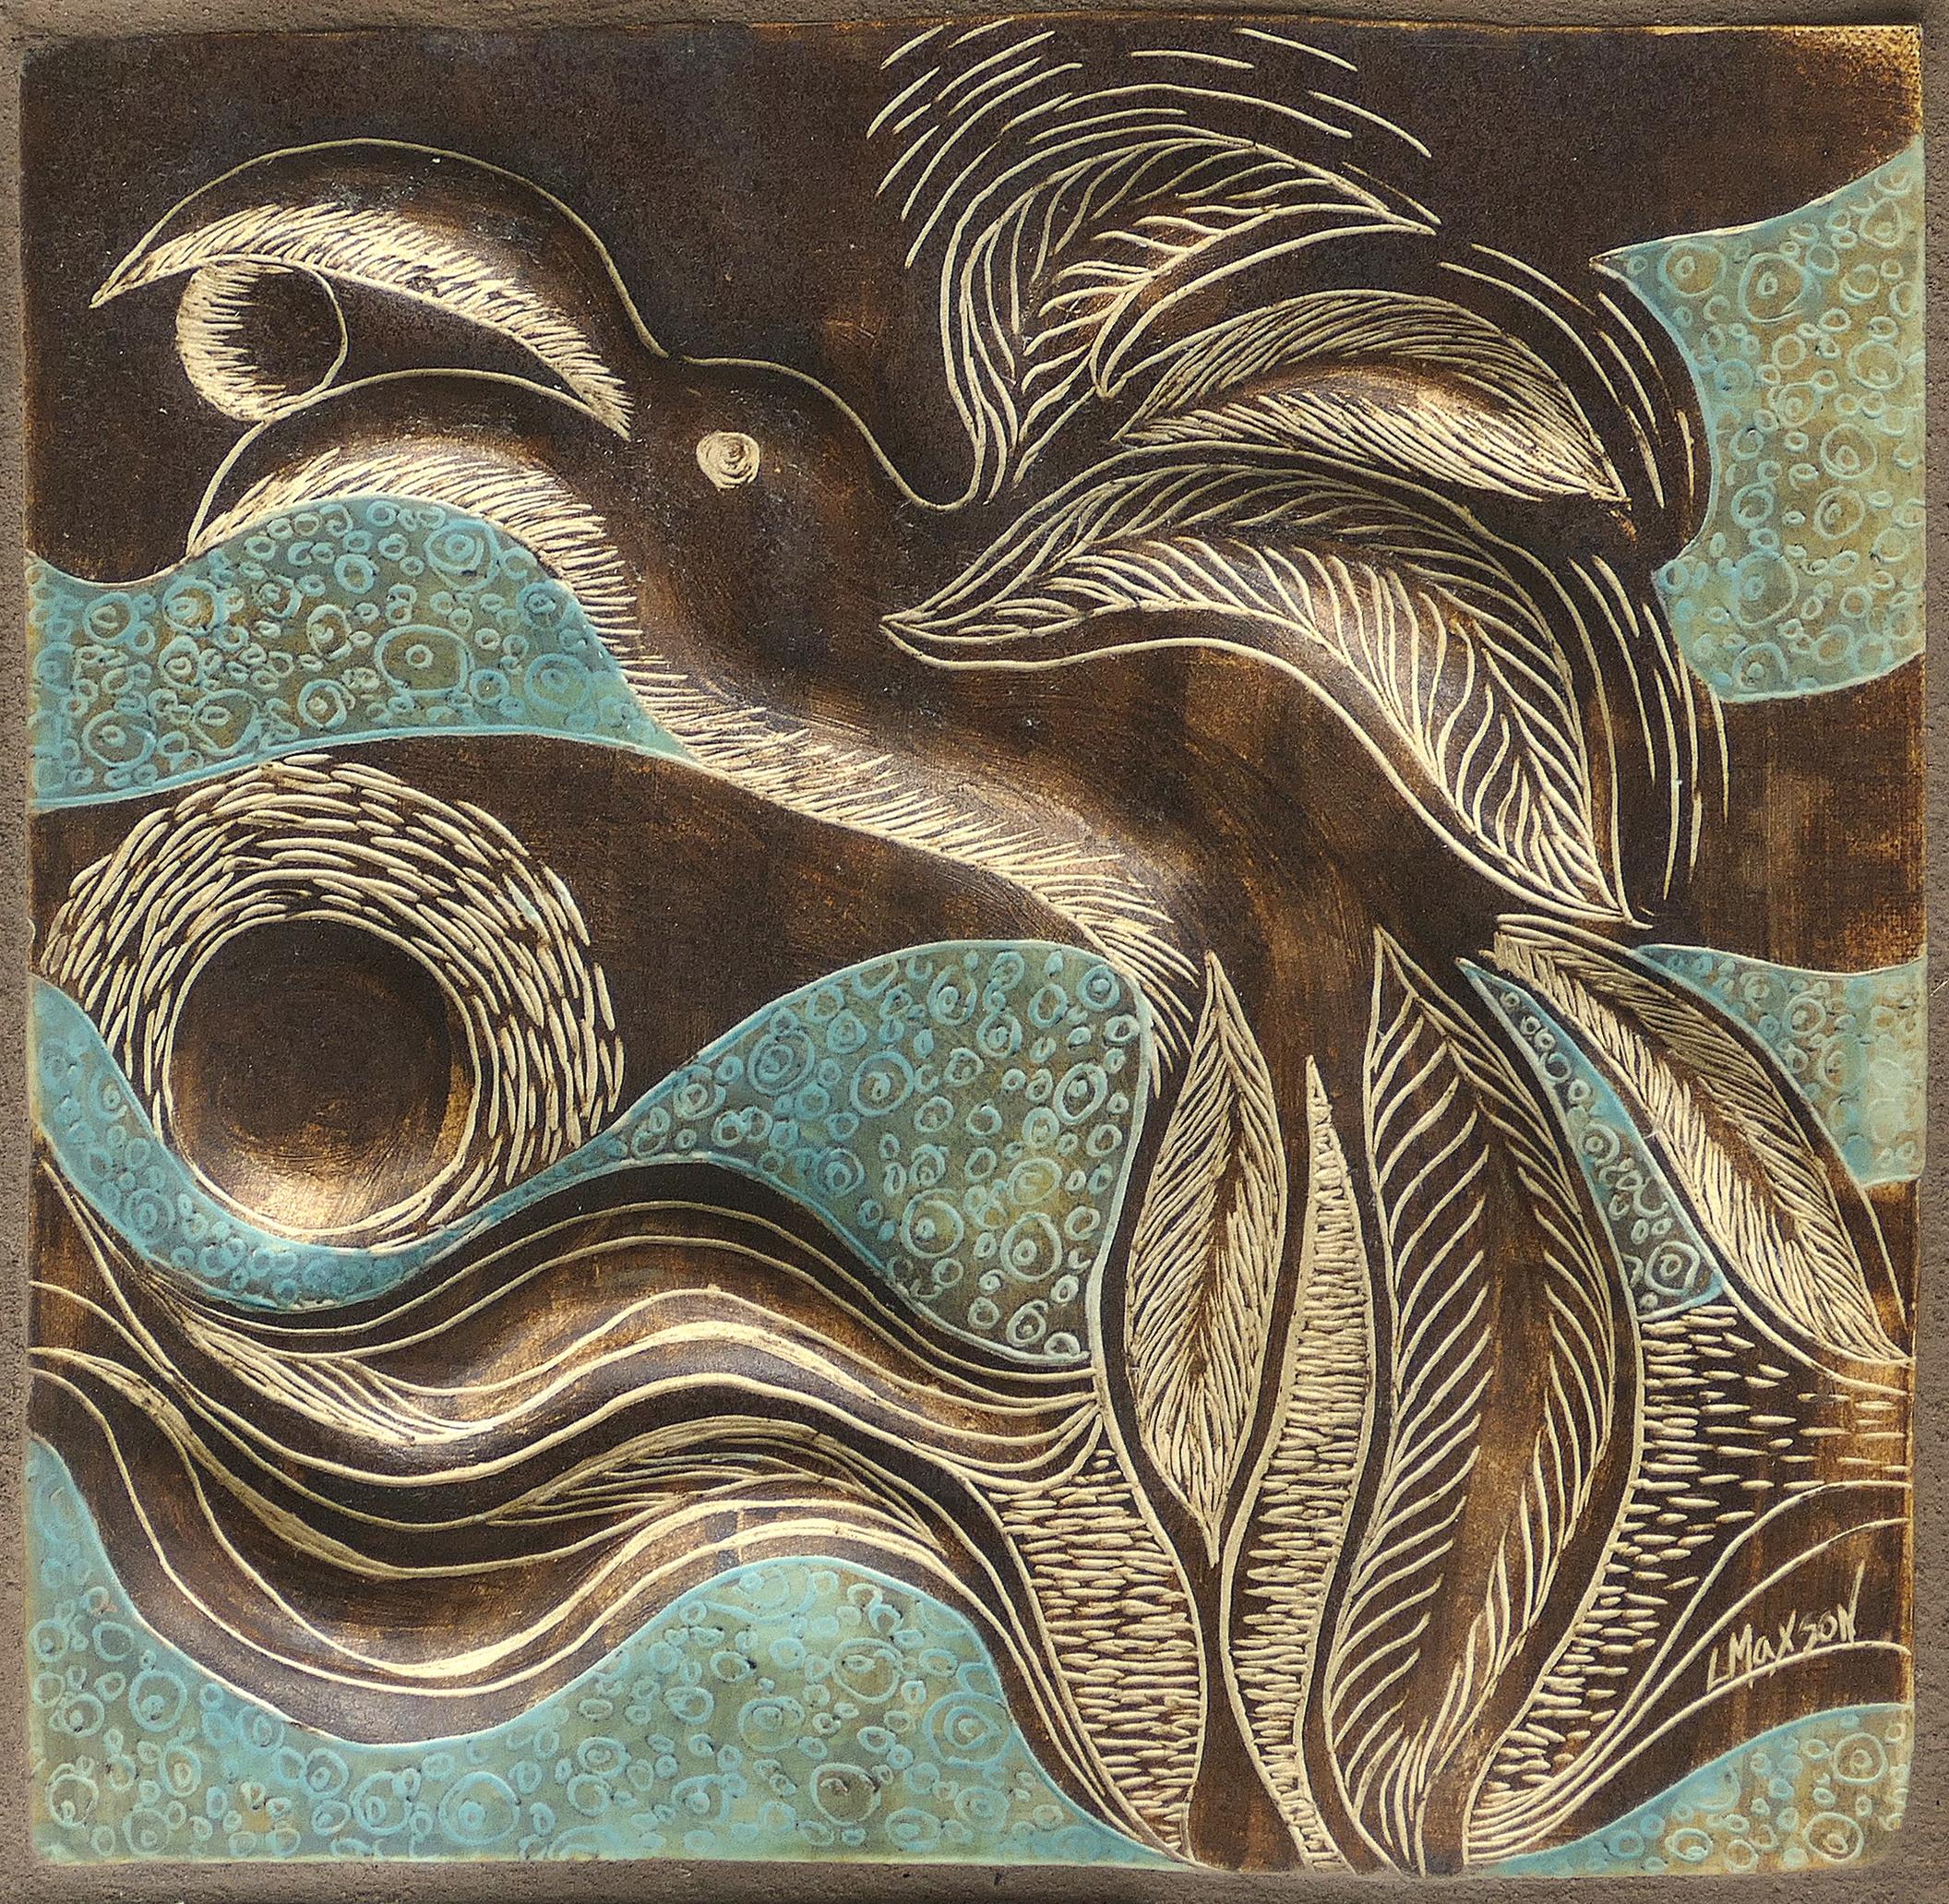 Linda Maxson California artist ceramic plaque depicting a bird

Offered for sale is a ceramic bas relief plaque by the Palm Desert, California artist Linda Maxson. This high bas relief plaque depicts a stylized bird feeding on a seed. It is wired